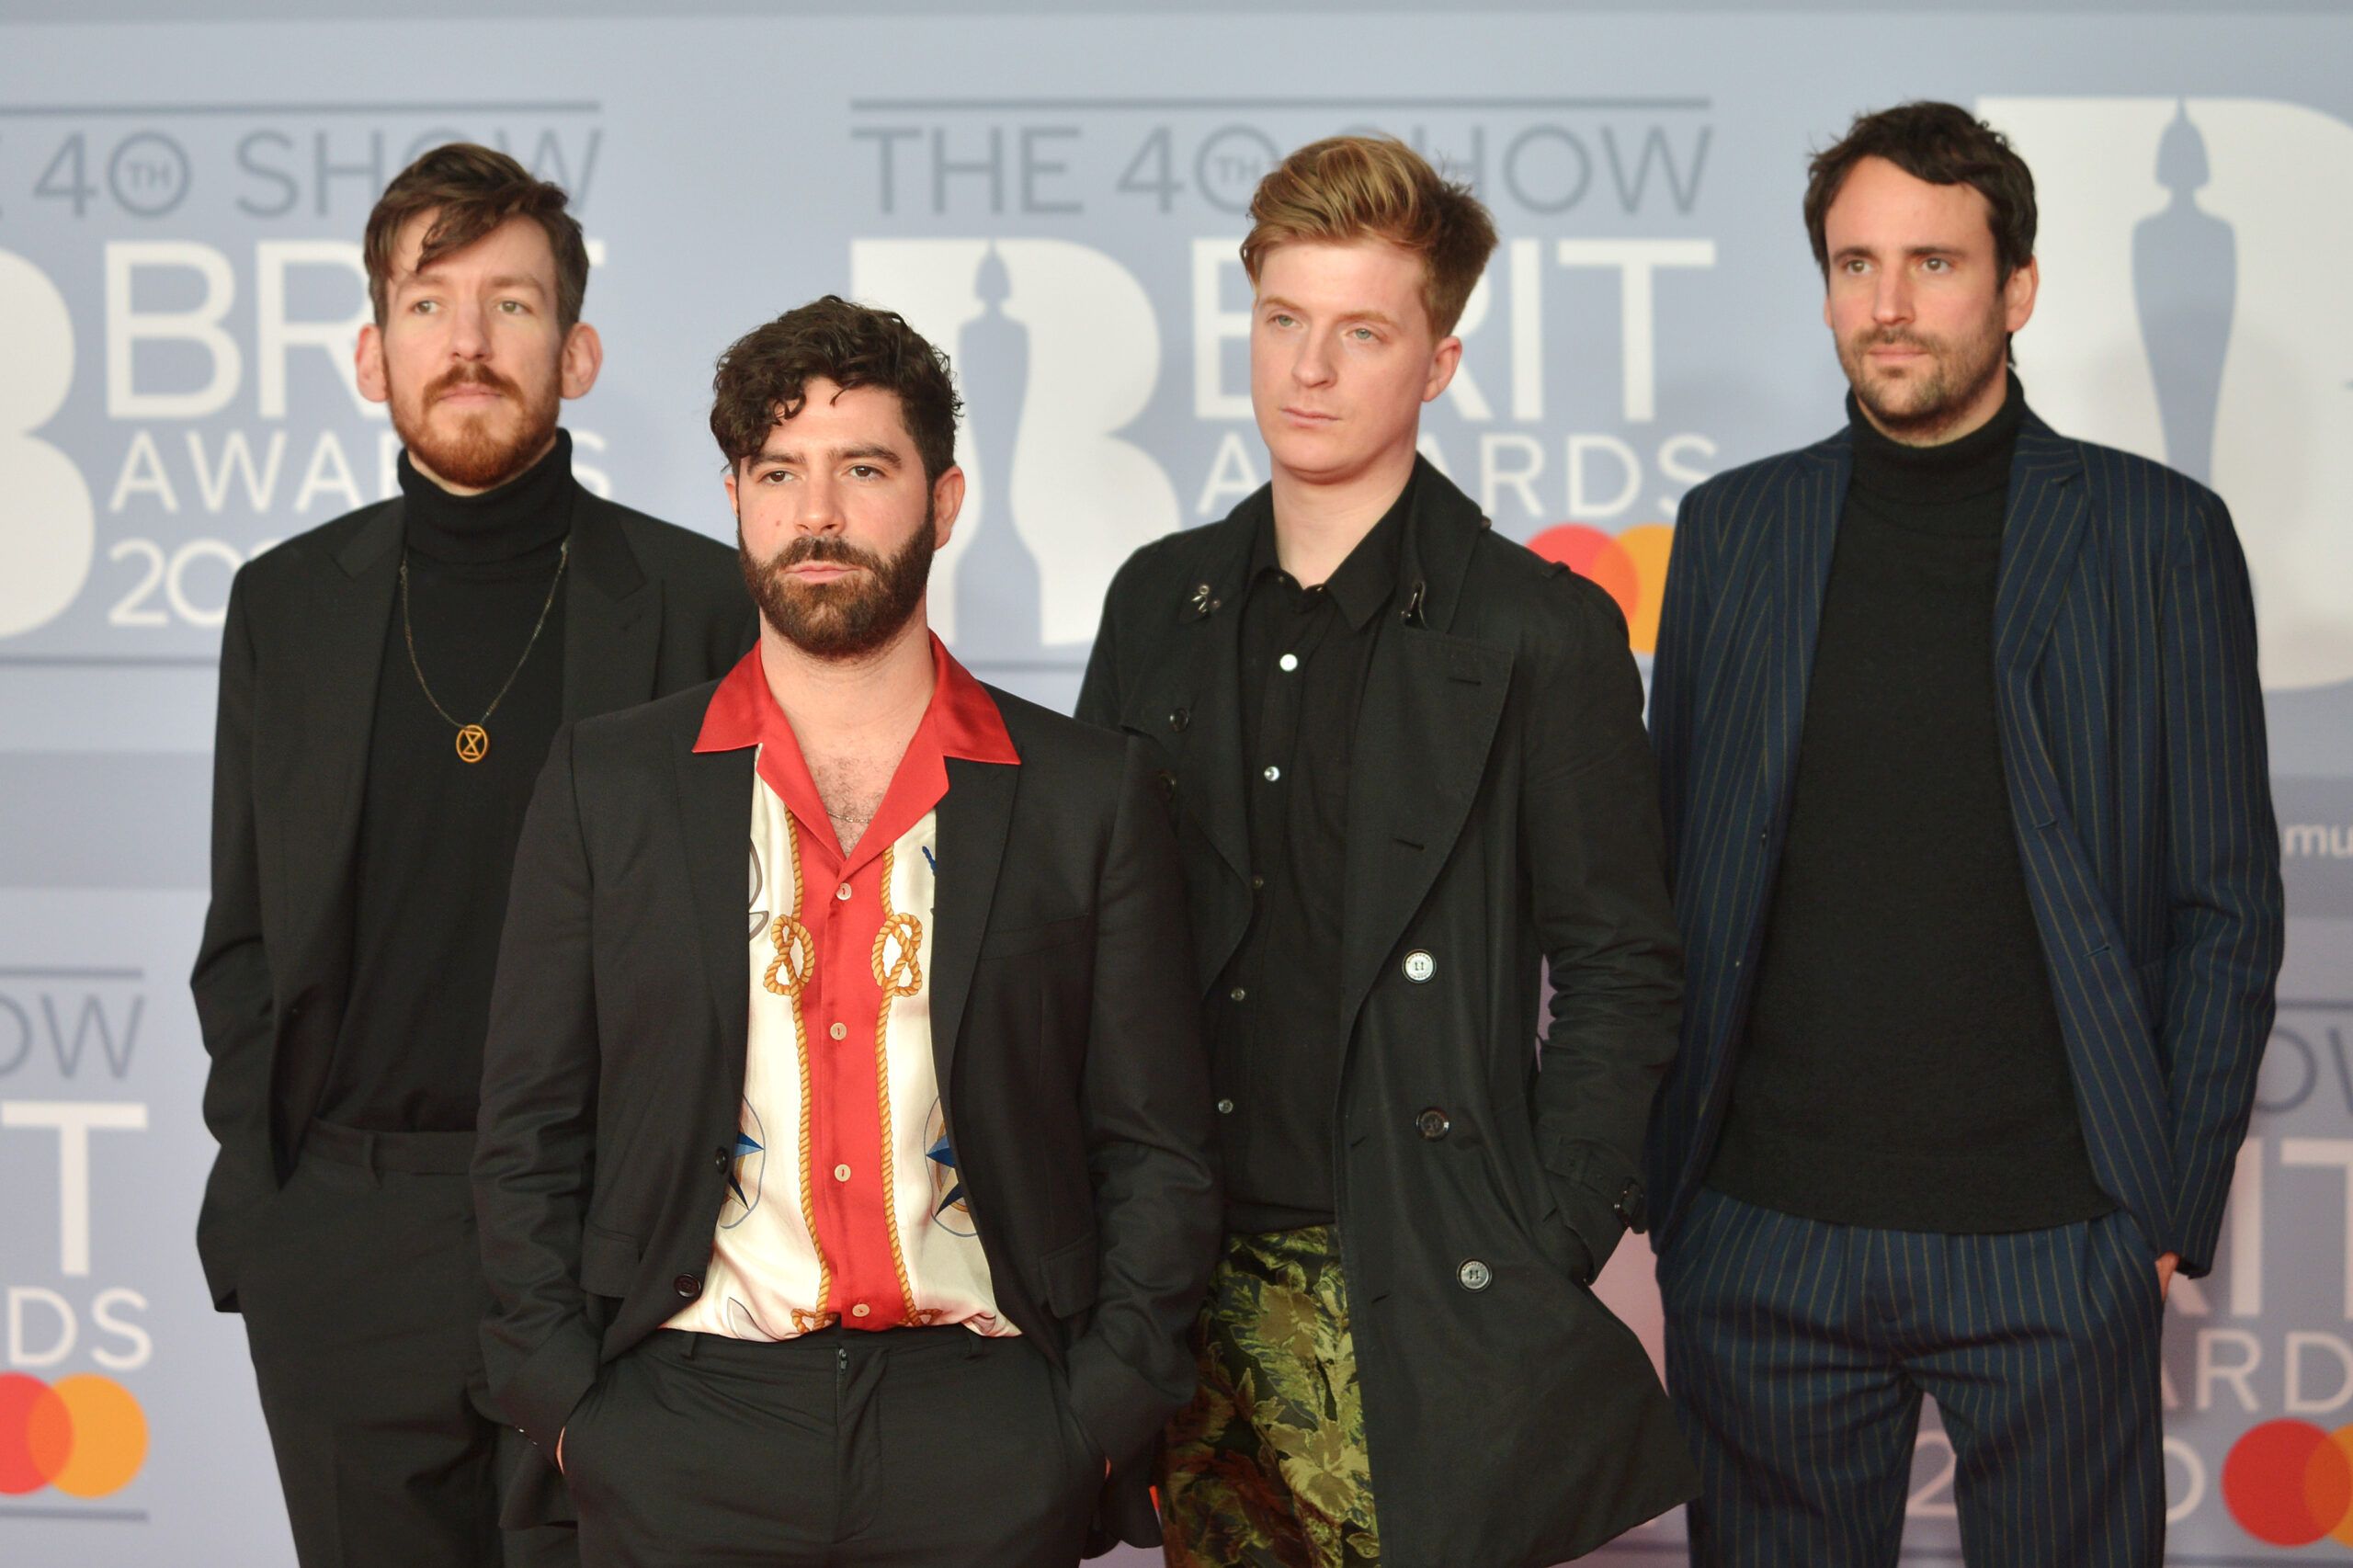 Foals' Hit "The Runner" Gets a Brooding Remix From RÜFÜS DU SOL: Exclusive